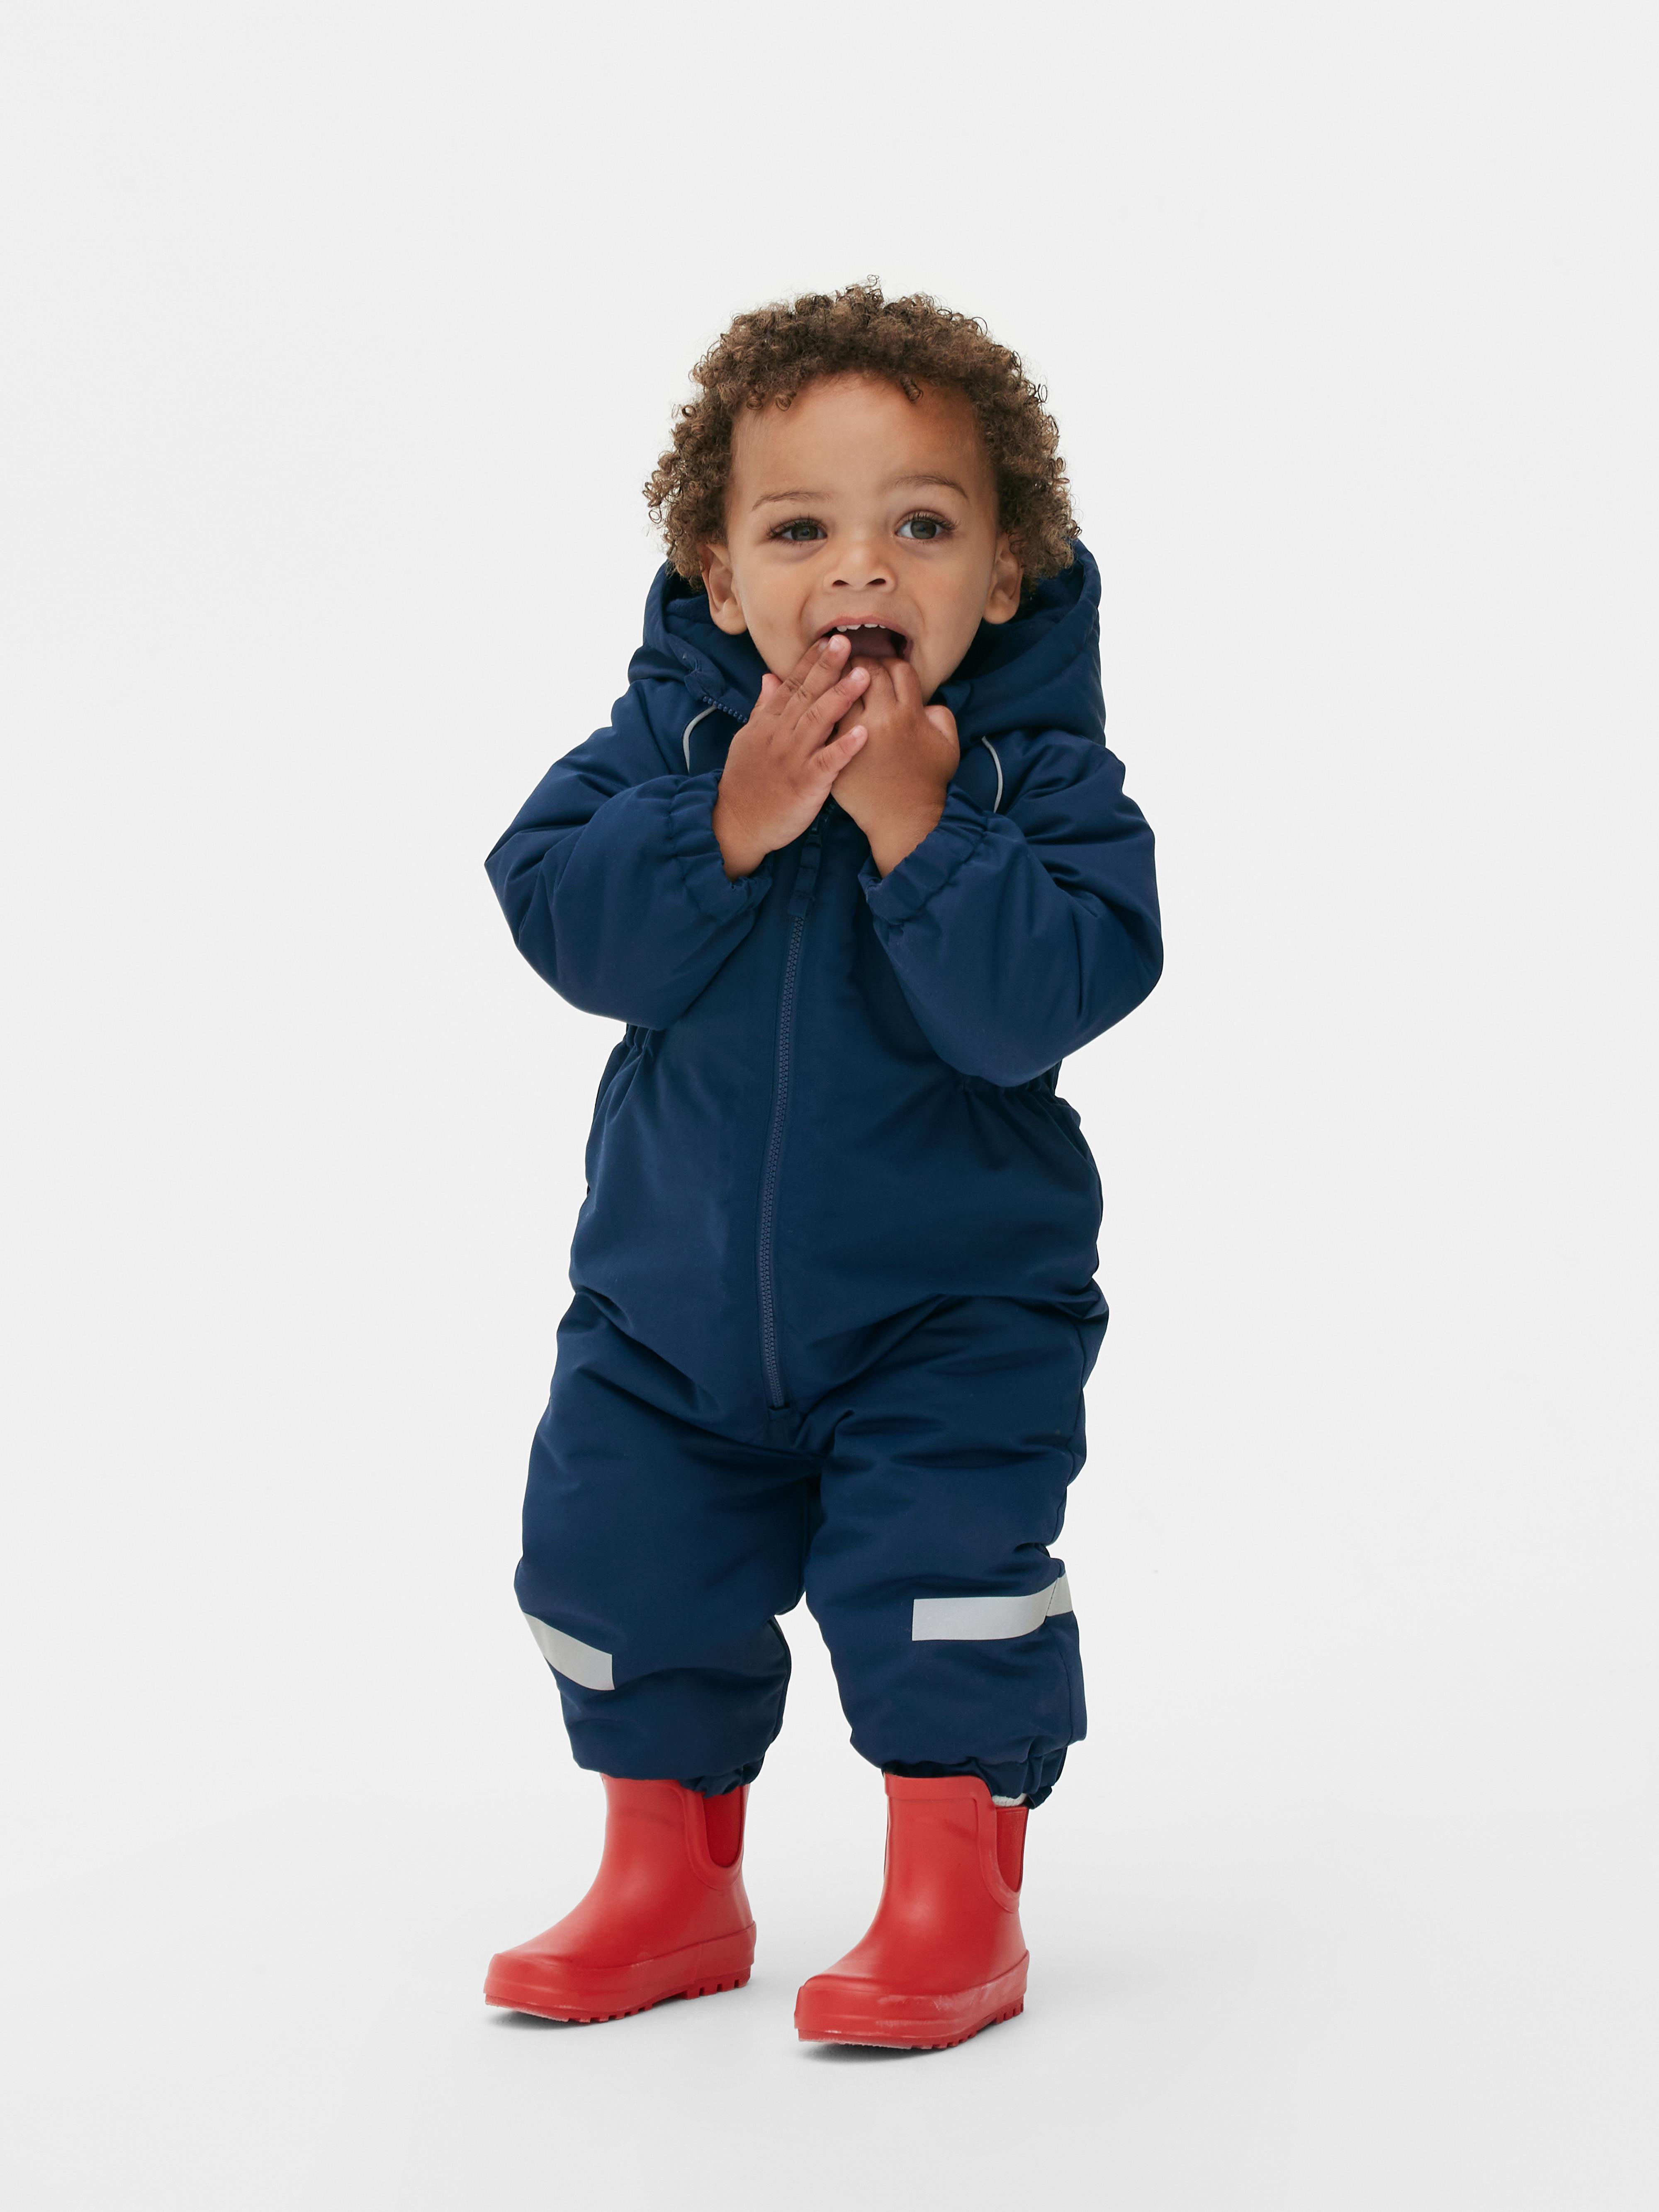 Padded Hooded Snowsuit